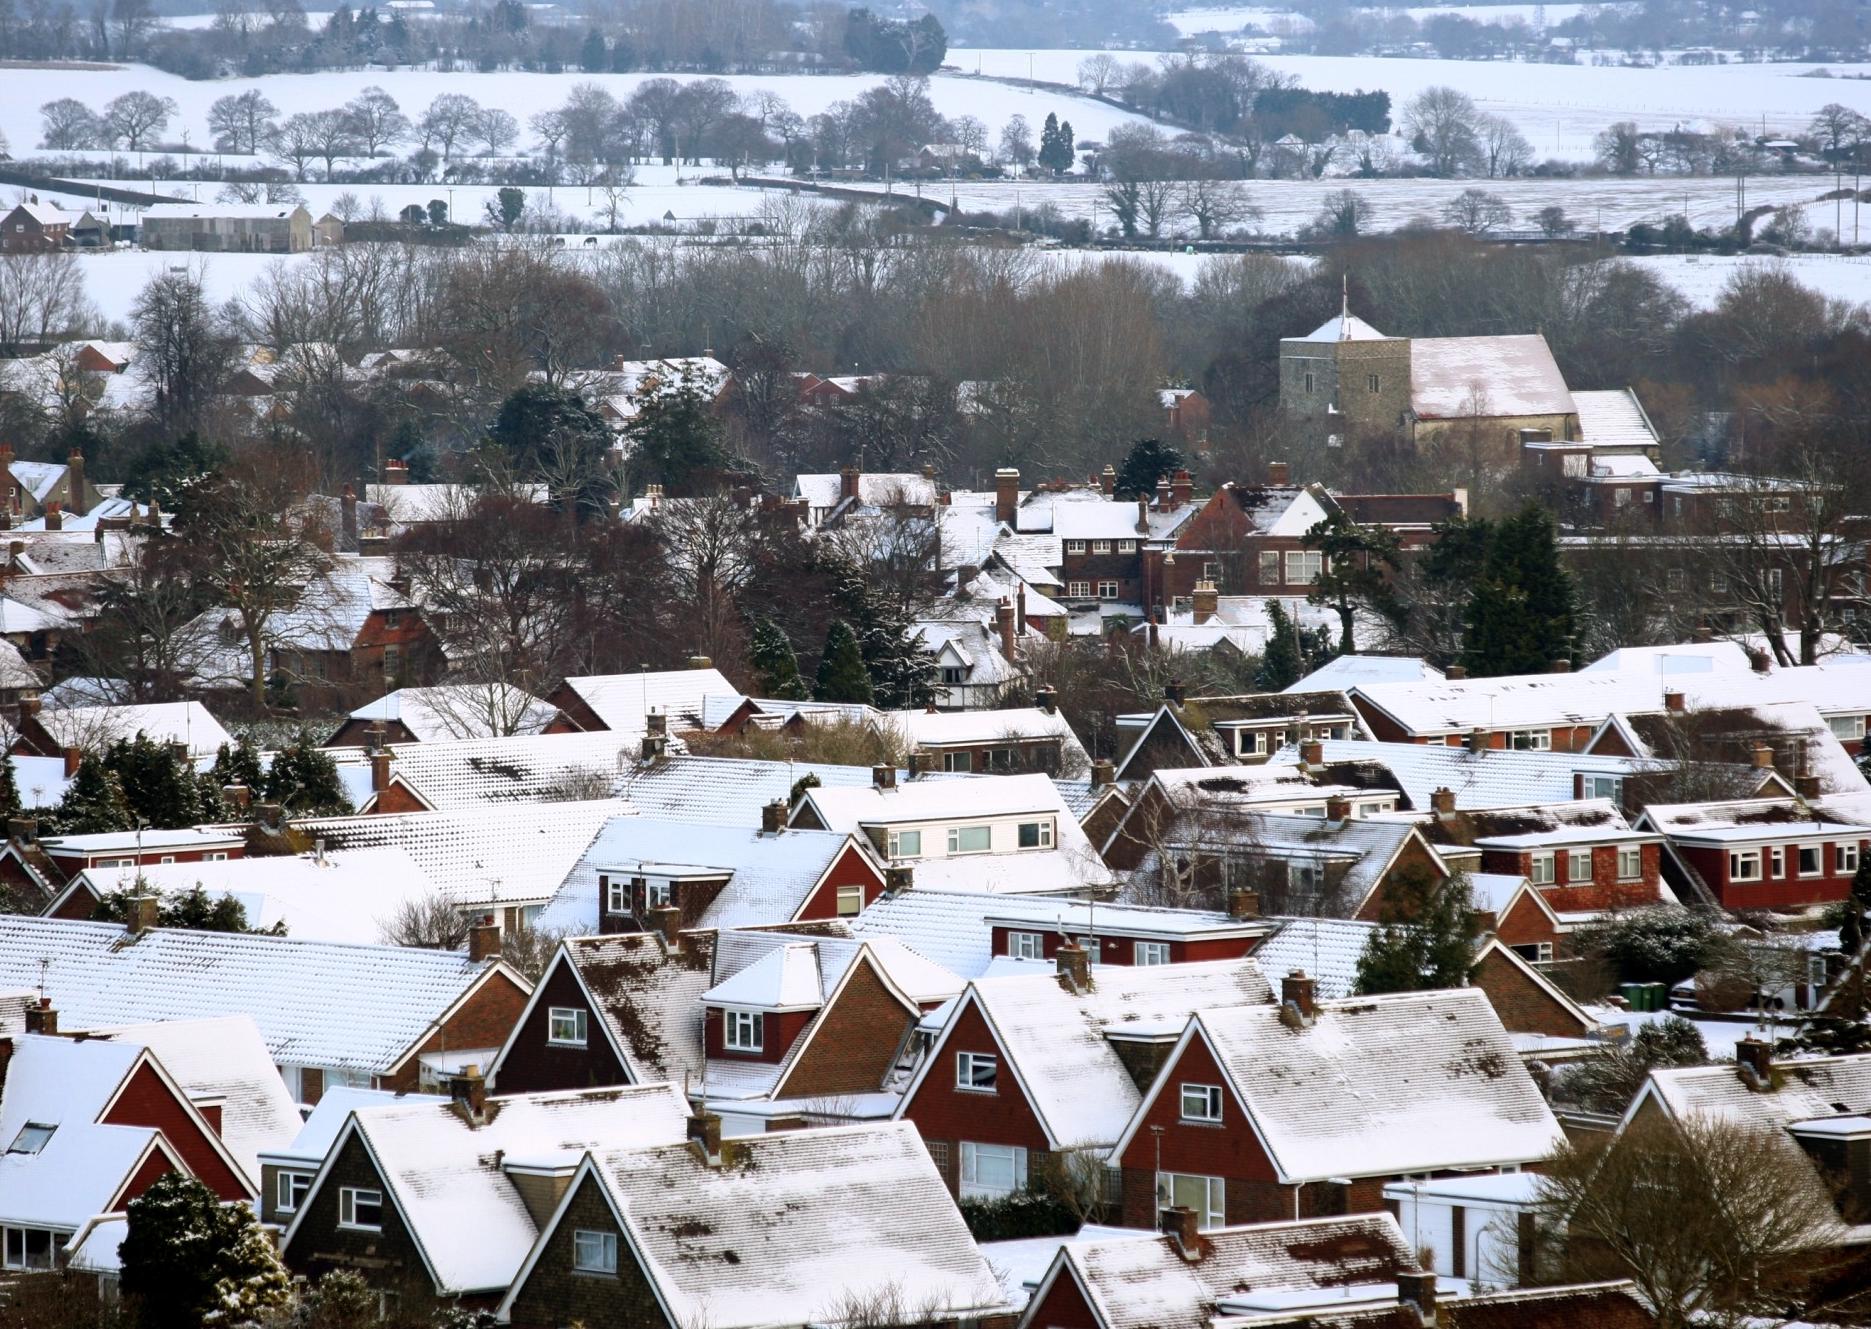 View from The Bostal, looking over snow covered Steyning. Photo by Steve Cobb